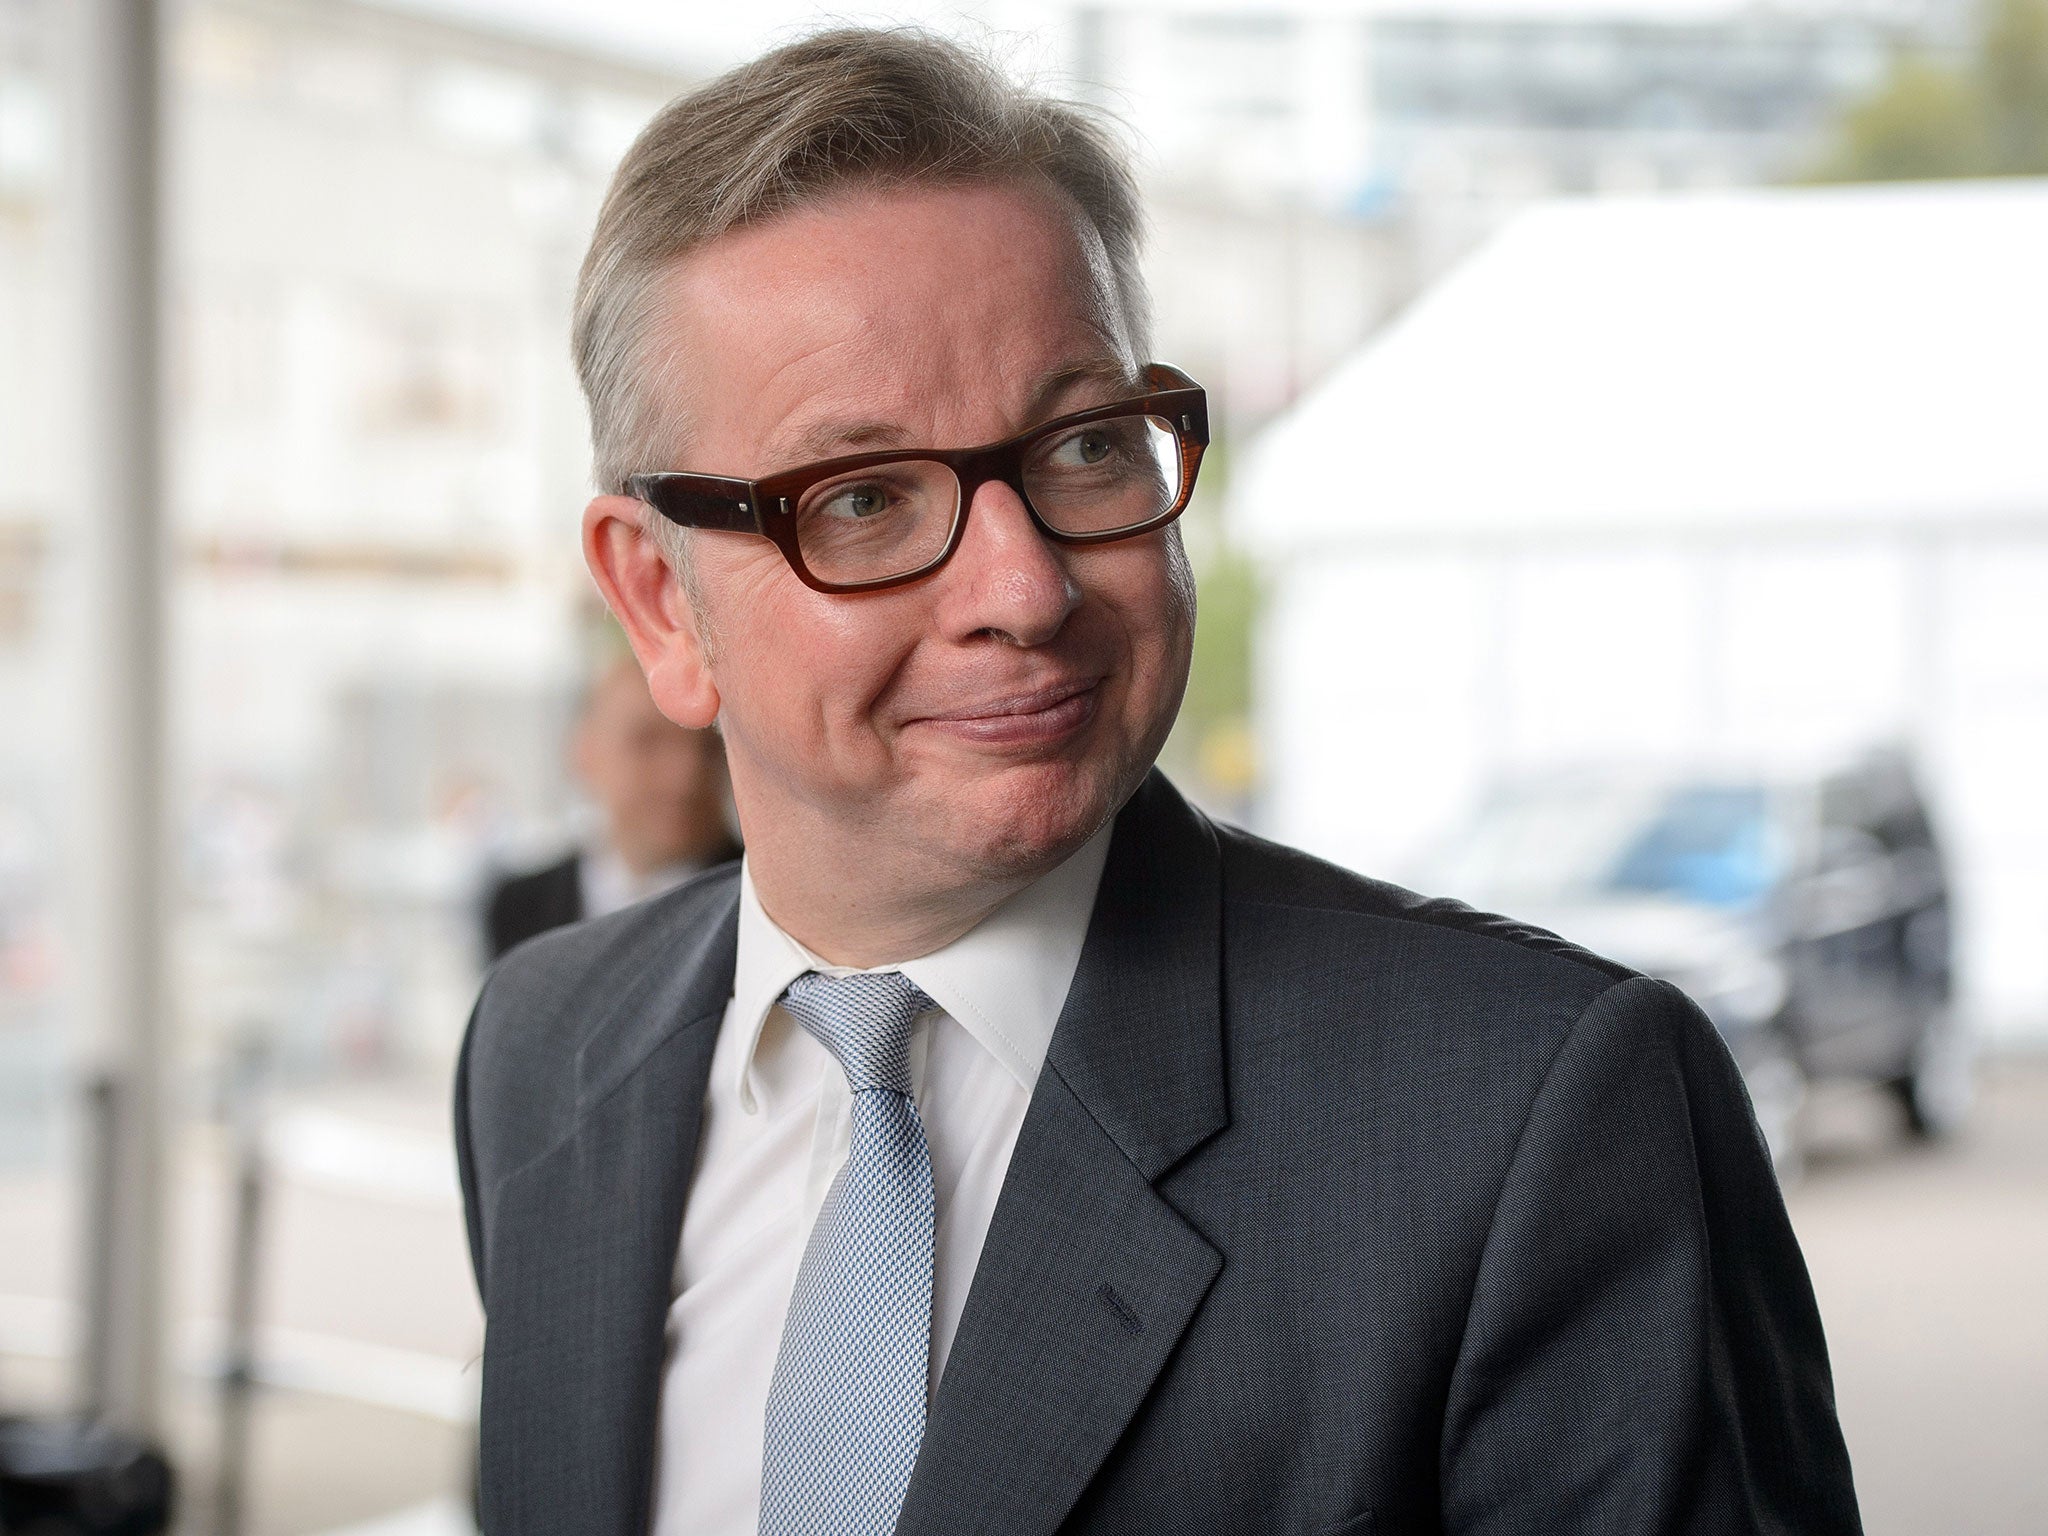 Just imagine if the Michael Gove years in education were followed by an ideologue with a different emphasis taking charge of the nation’s schools